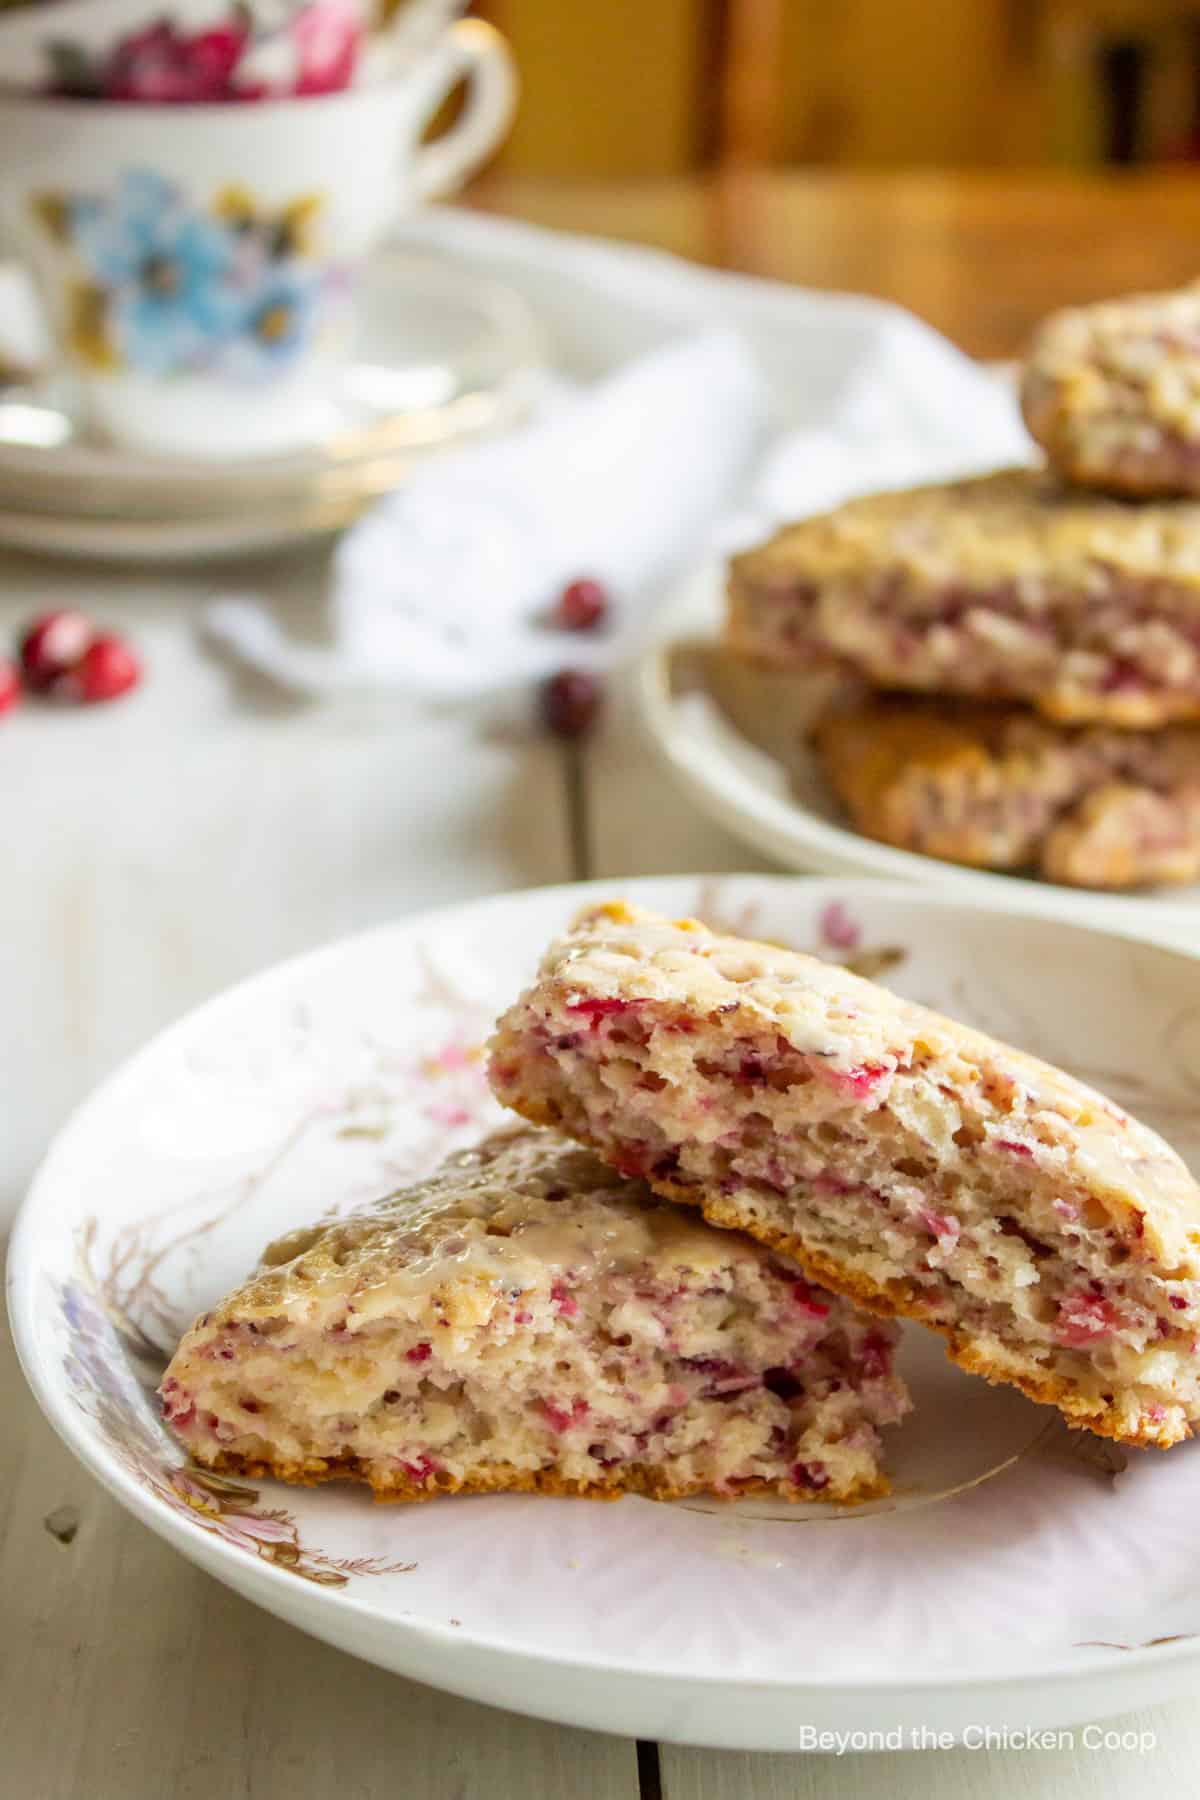 Two cranberry scones on a plate.